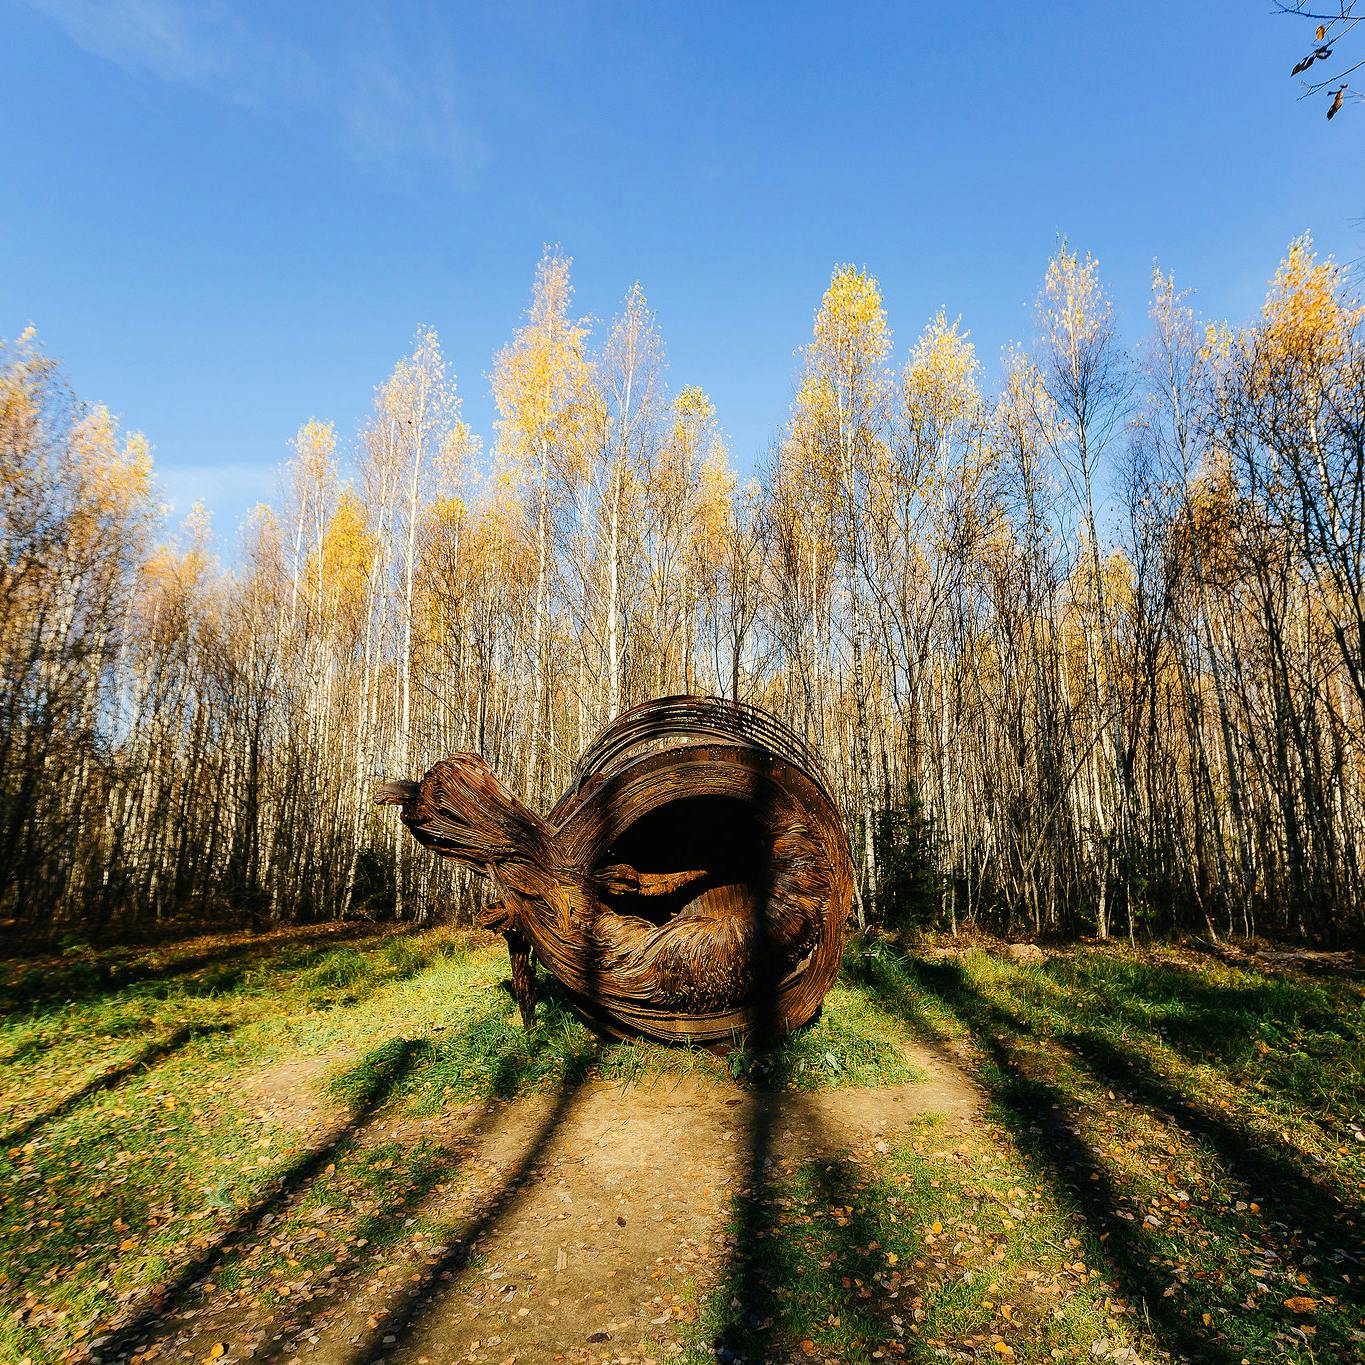 large rust colored metal sculpture featuring many twists and folds on view in park in autumn time